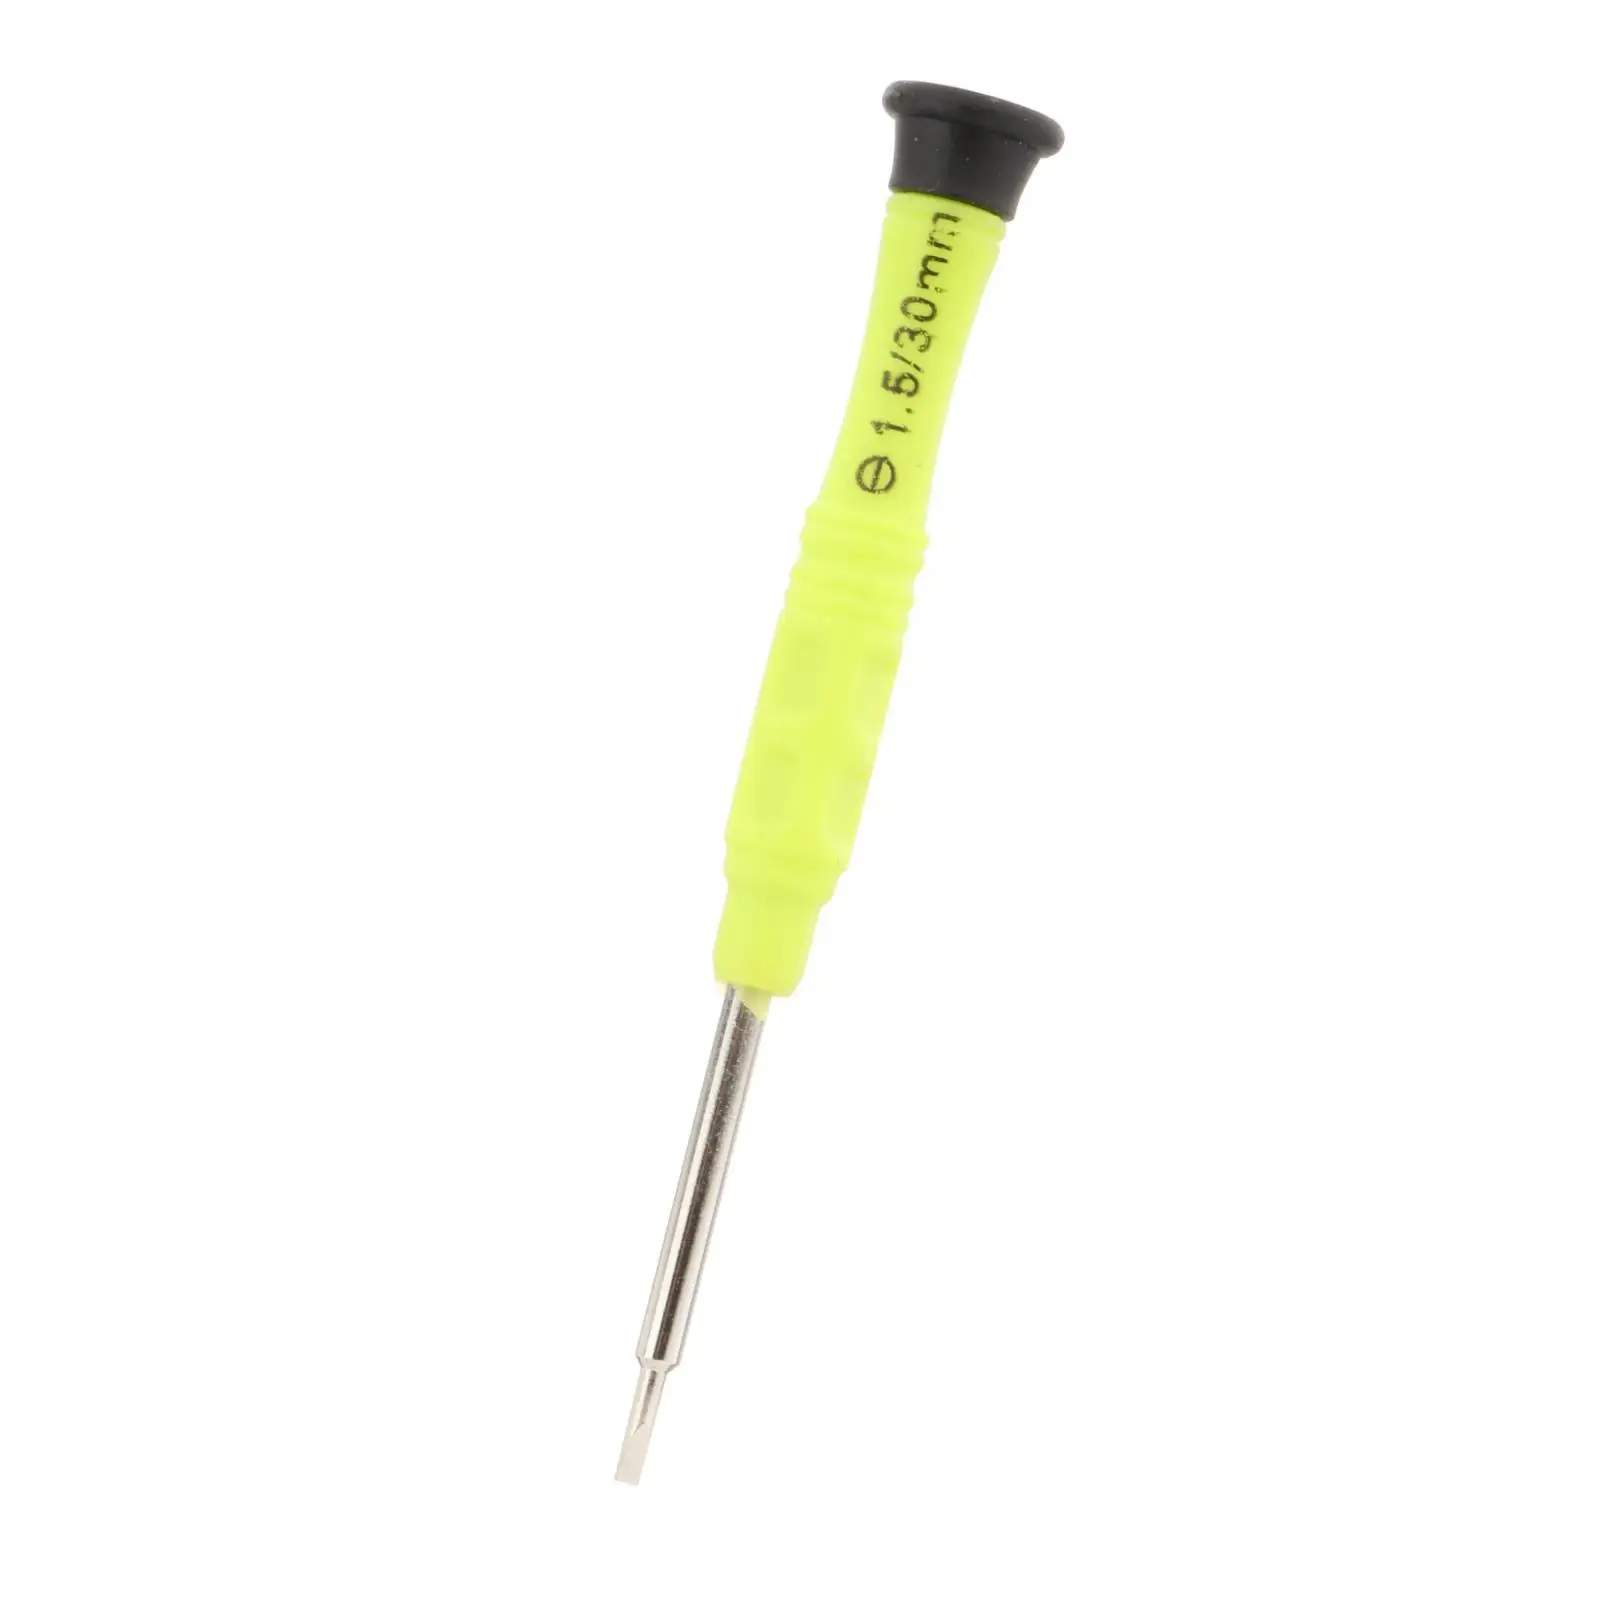 Epee Fencing Screwdriver Maintenance Tool Easy to Use Professional Durable for Epee Foil Competitions Fencing Accessories